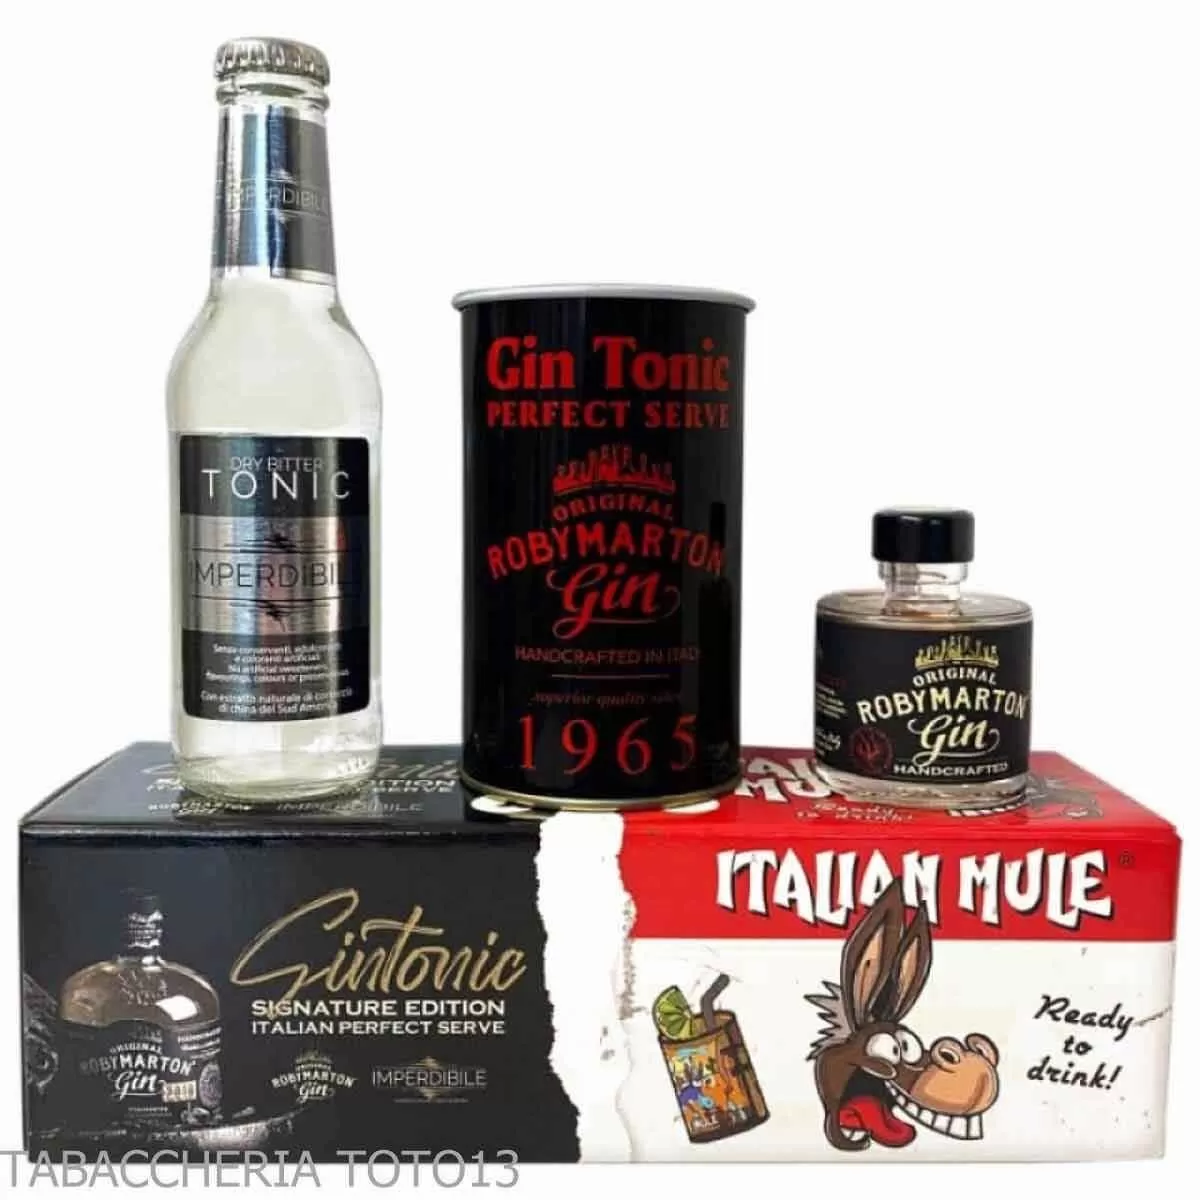 Roby Marton Original Gin Tonic delivery pack